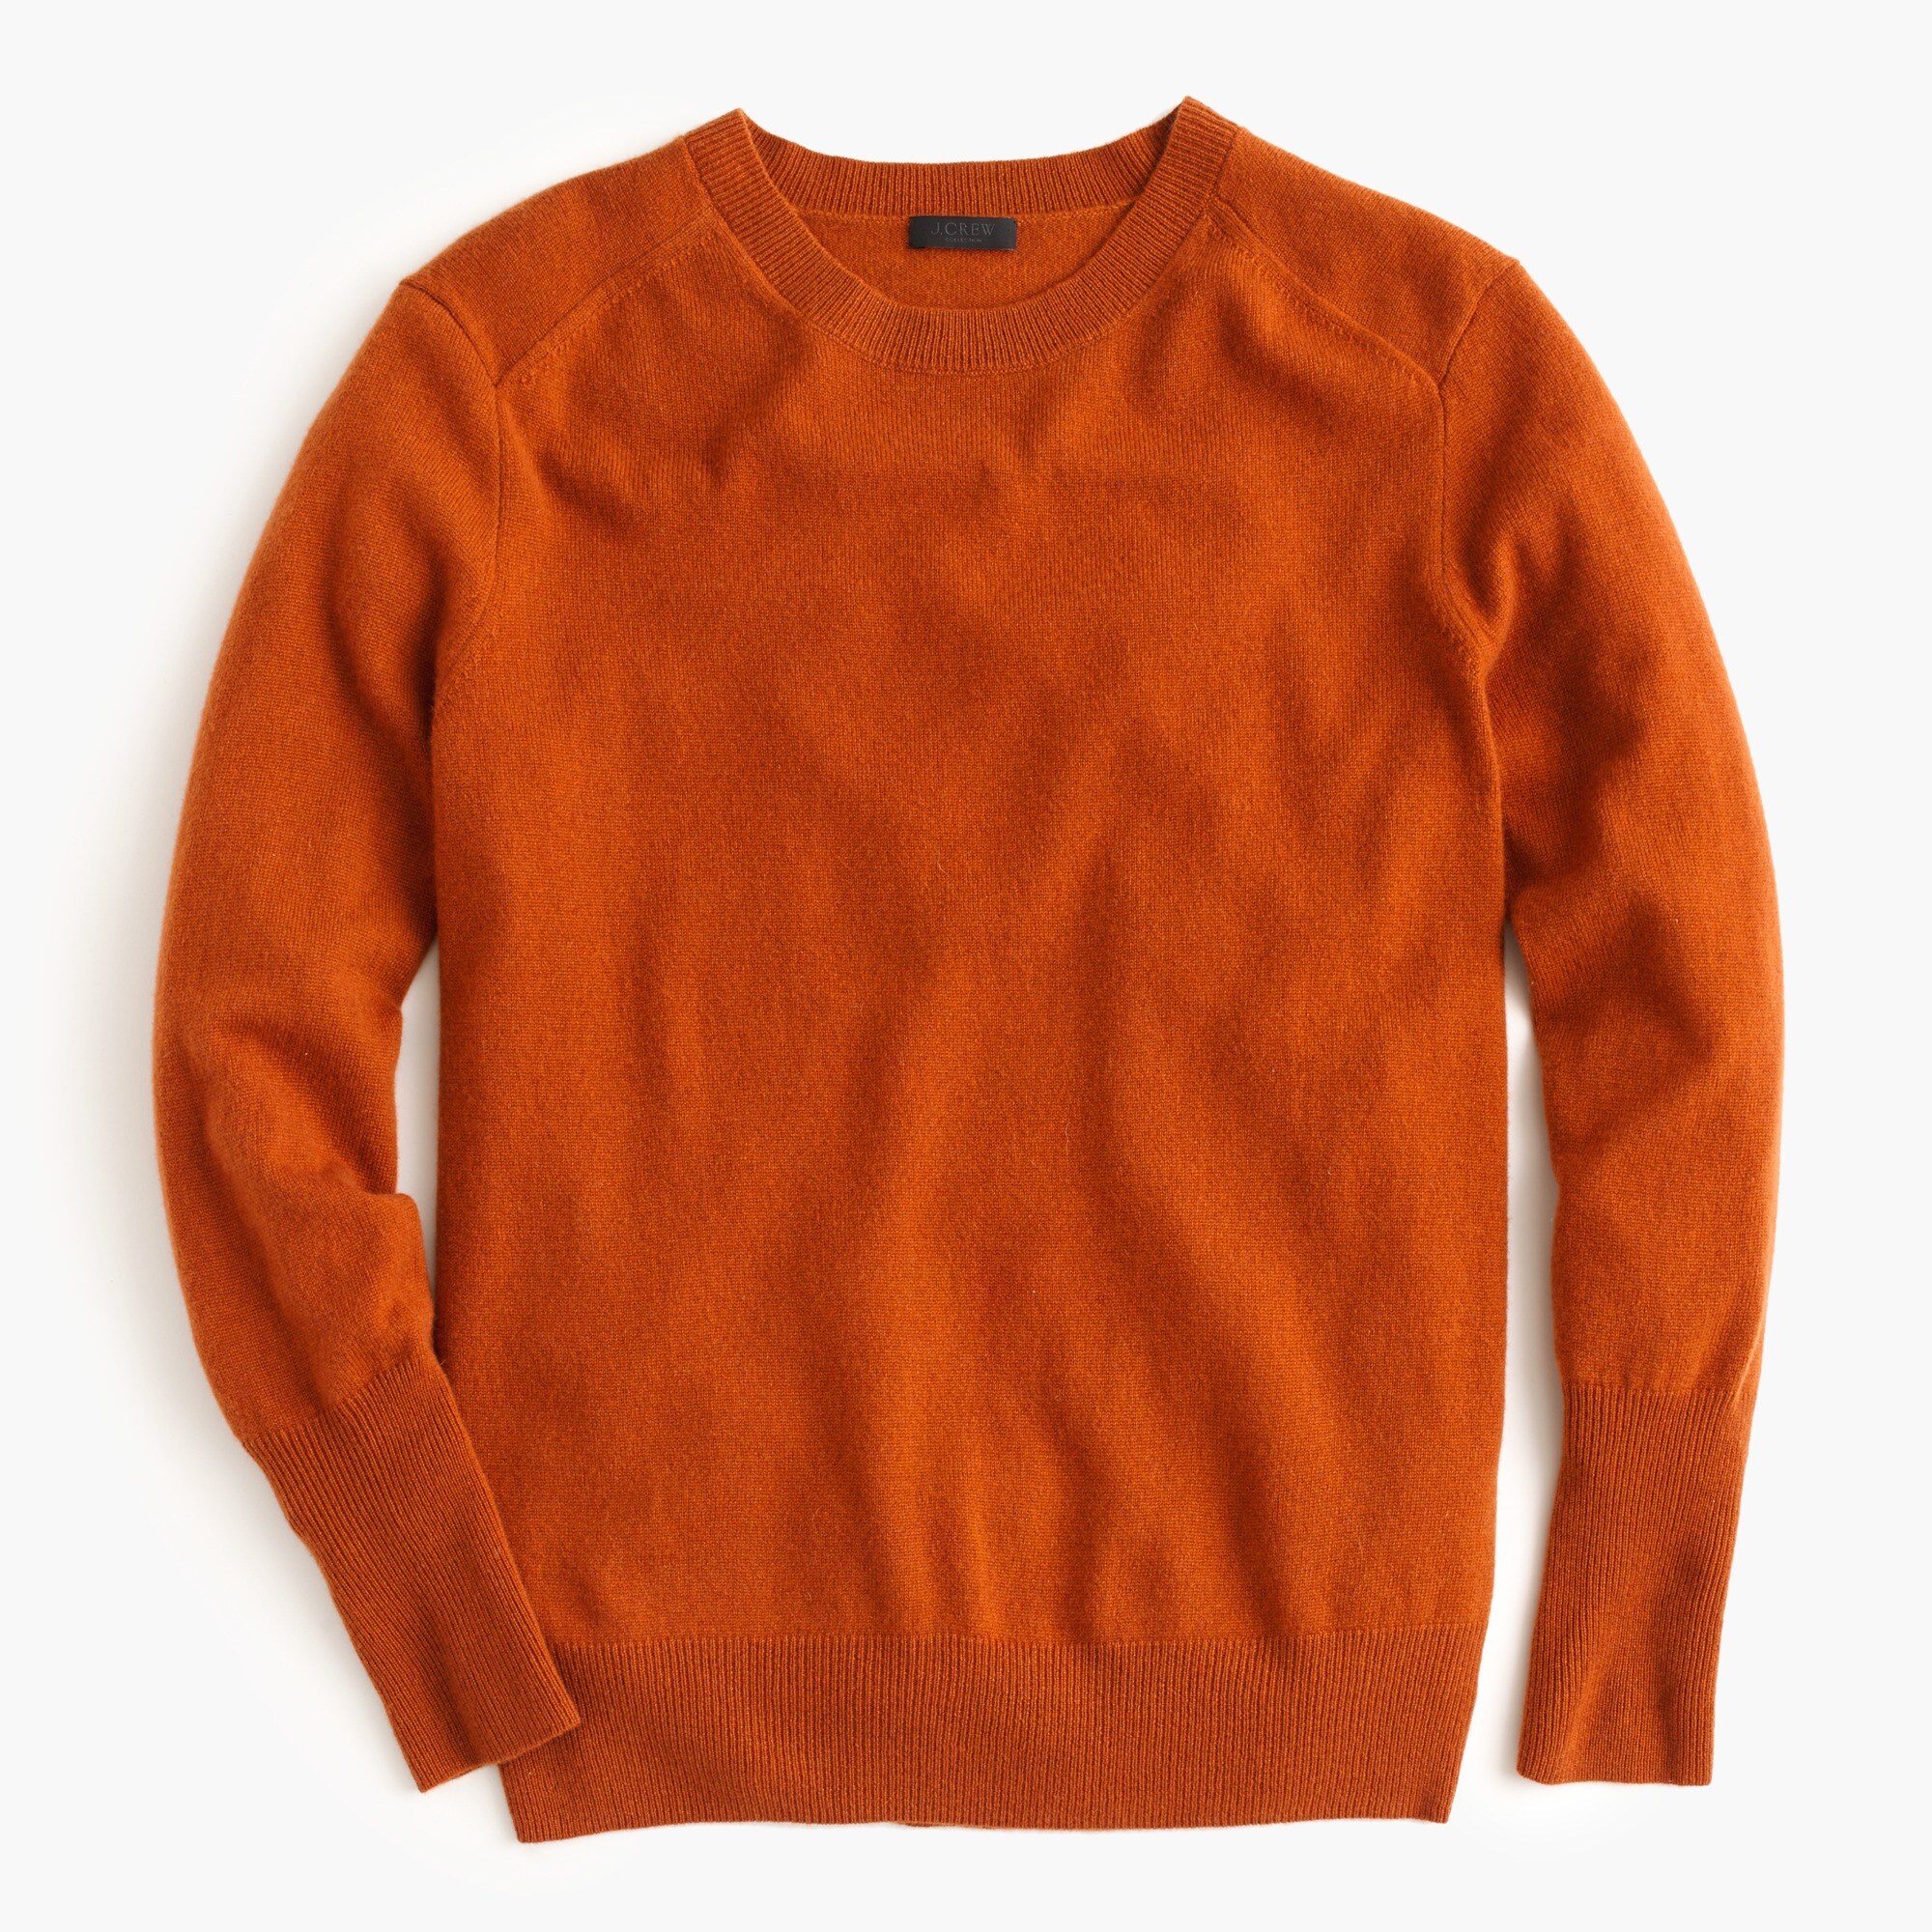 Italian relaxed cashmere pullover sweater : Women pullovers | J.Crew